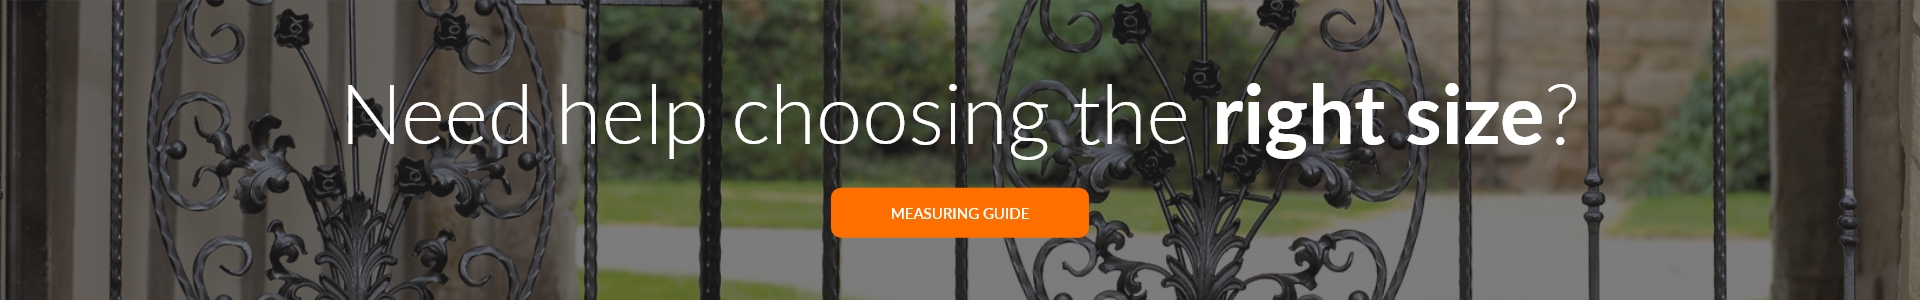 View the measuring guide for help with ordering sizes